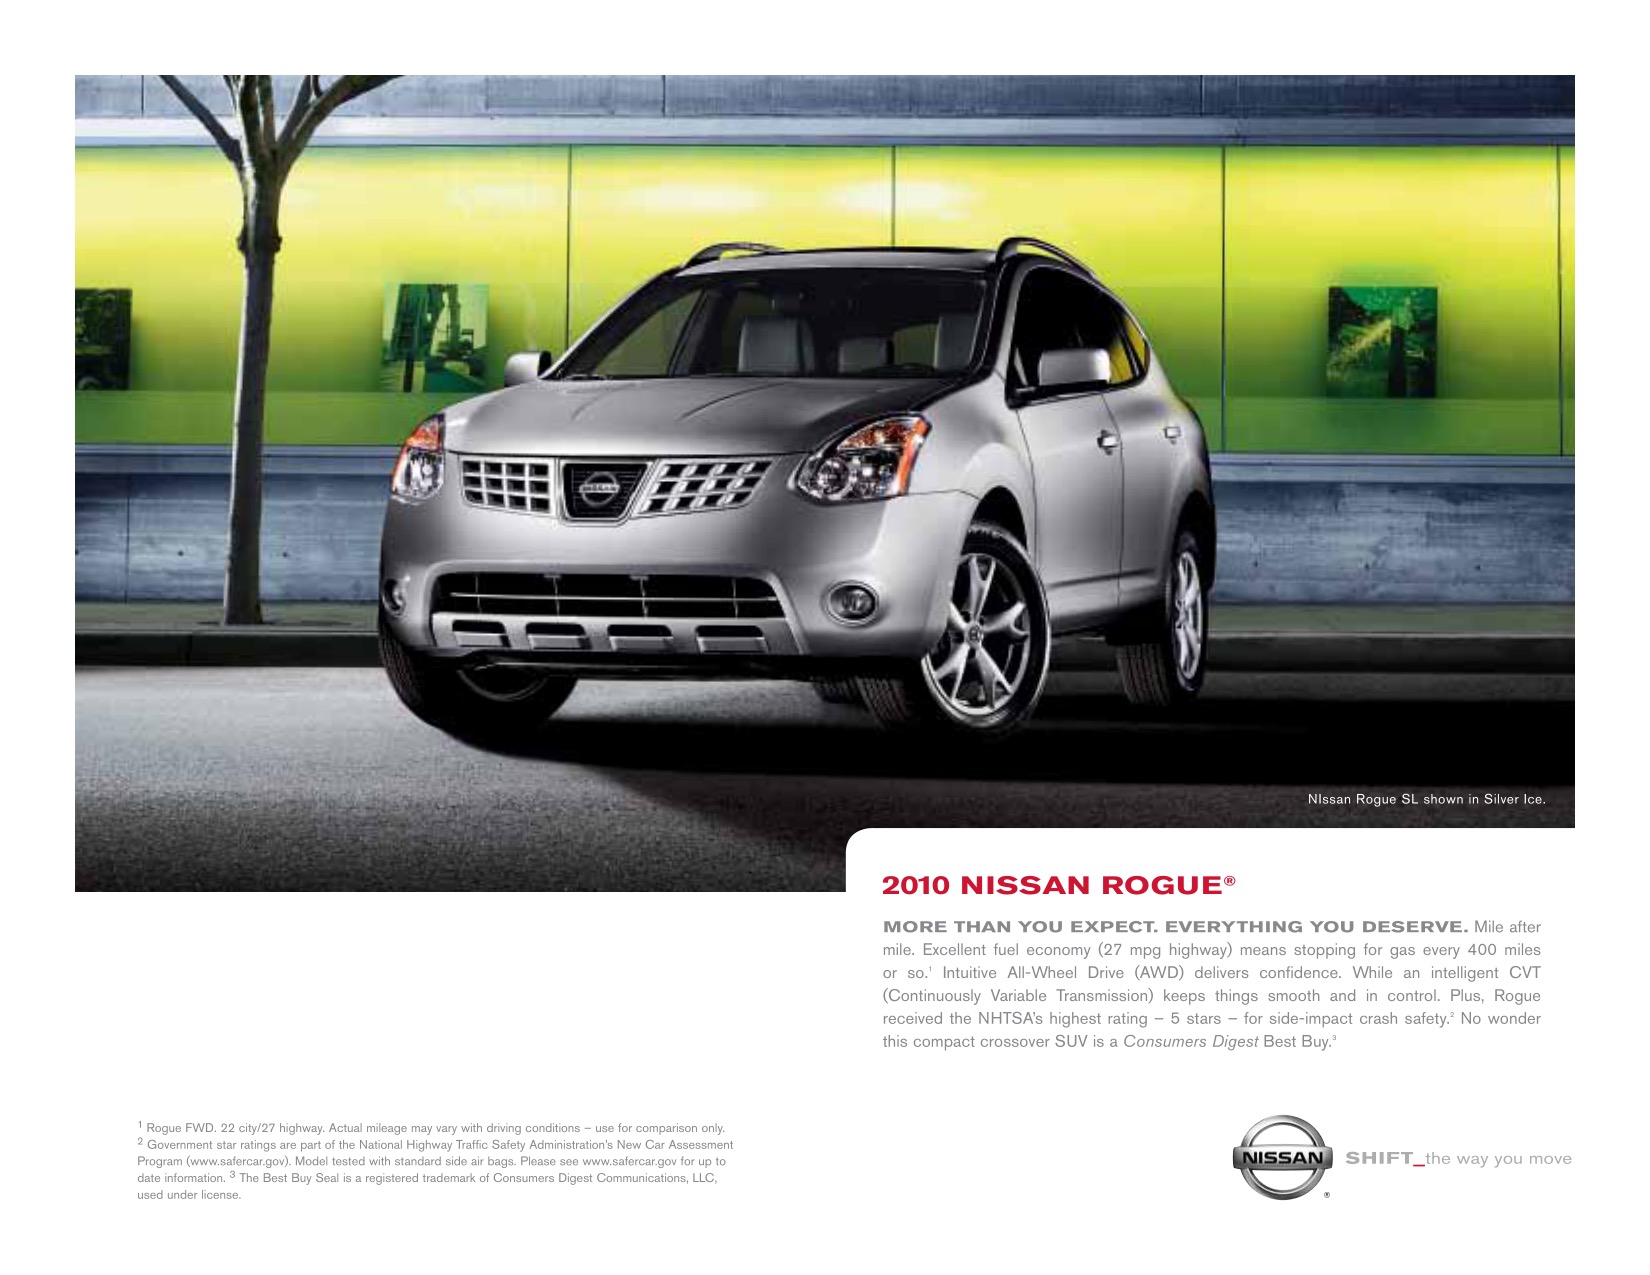 2010 Nissan Rogue Brochure Page 1